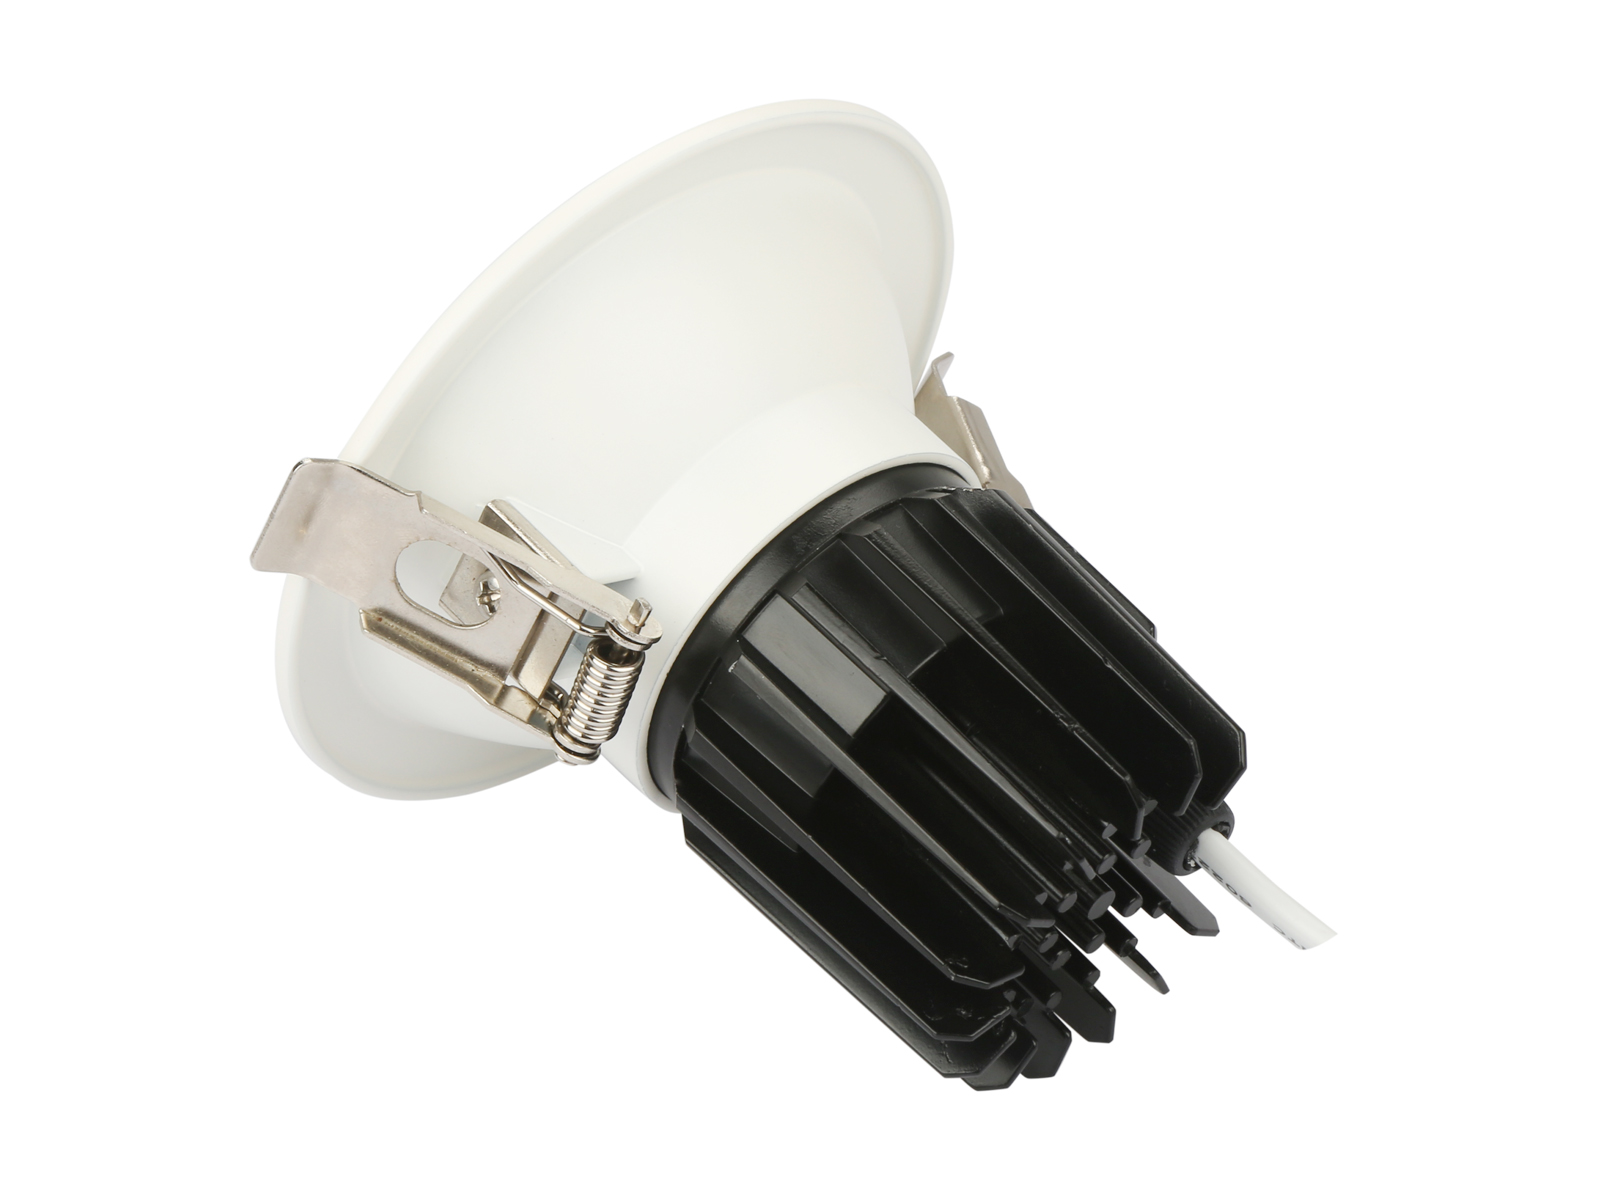 DL88 2 Aluminum Dimmable LED Downlight Fixture